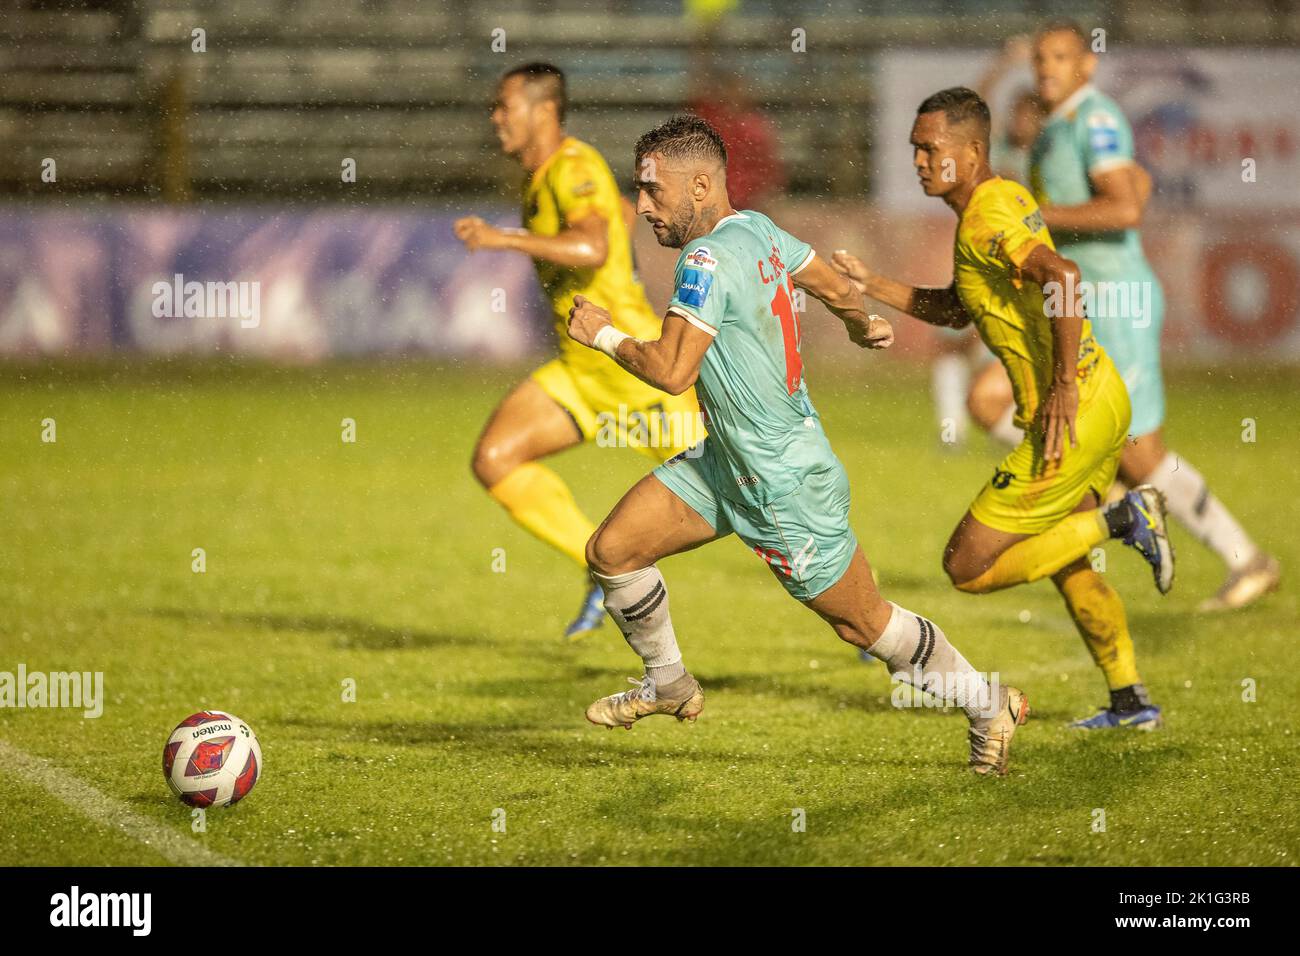 PATTAYA, THAILAND - SEPTEMBER 18:  CAIQUE FREITAS RIBEIRO of Pattaya Dolphins United during the Thai League 3 East match between Pattaya Dolphins and Marines Eureka  at Nong Prue Stadium on September 18, 2022 in PATTAYA, THAILAND (Photo by Peter van der Klooster/Alamy Live News) Stock Photo